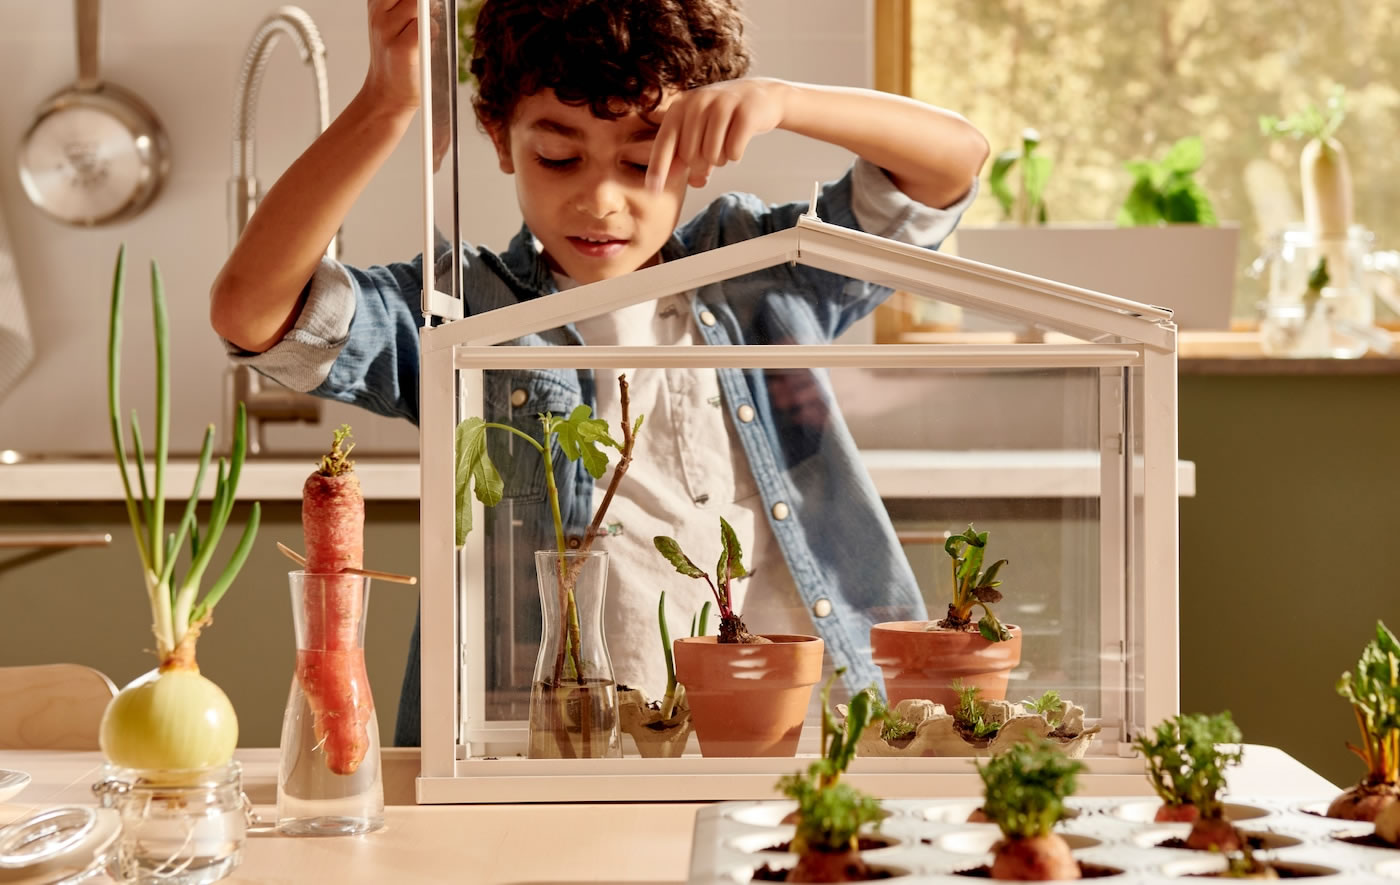 IKEA Ideas - Let the growing season activate your child